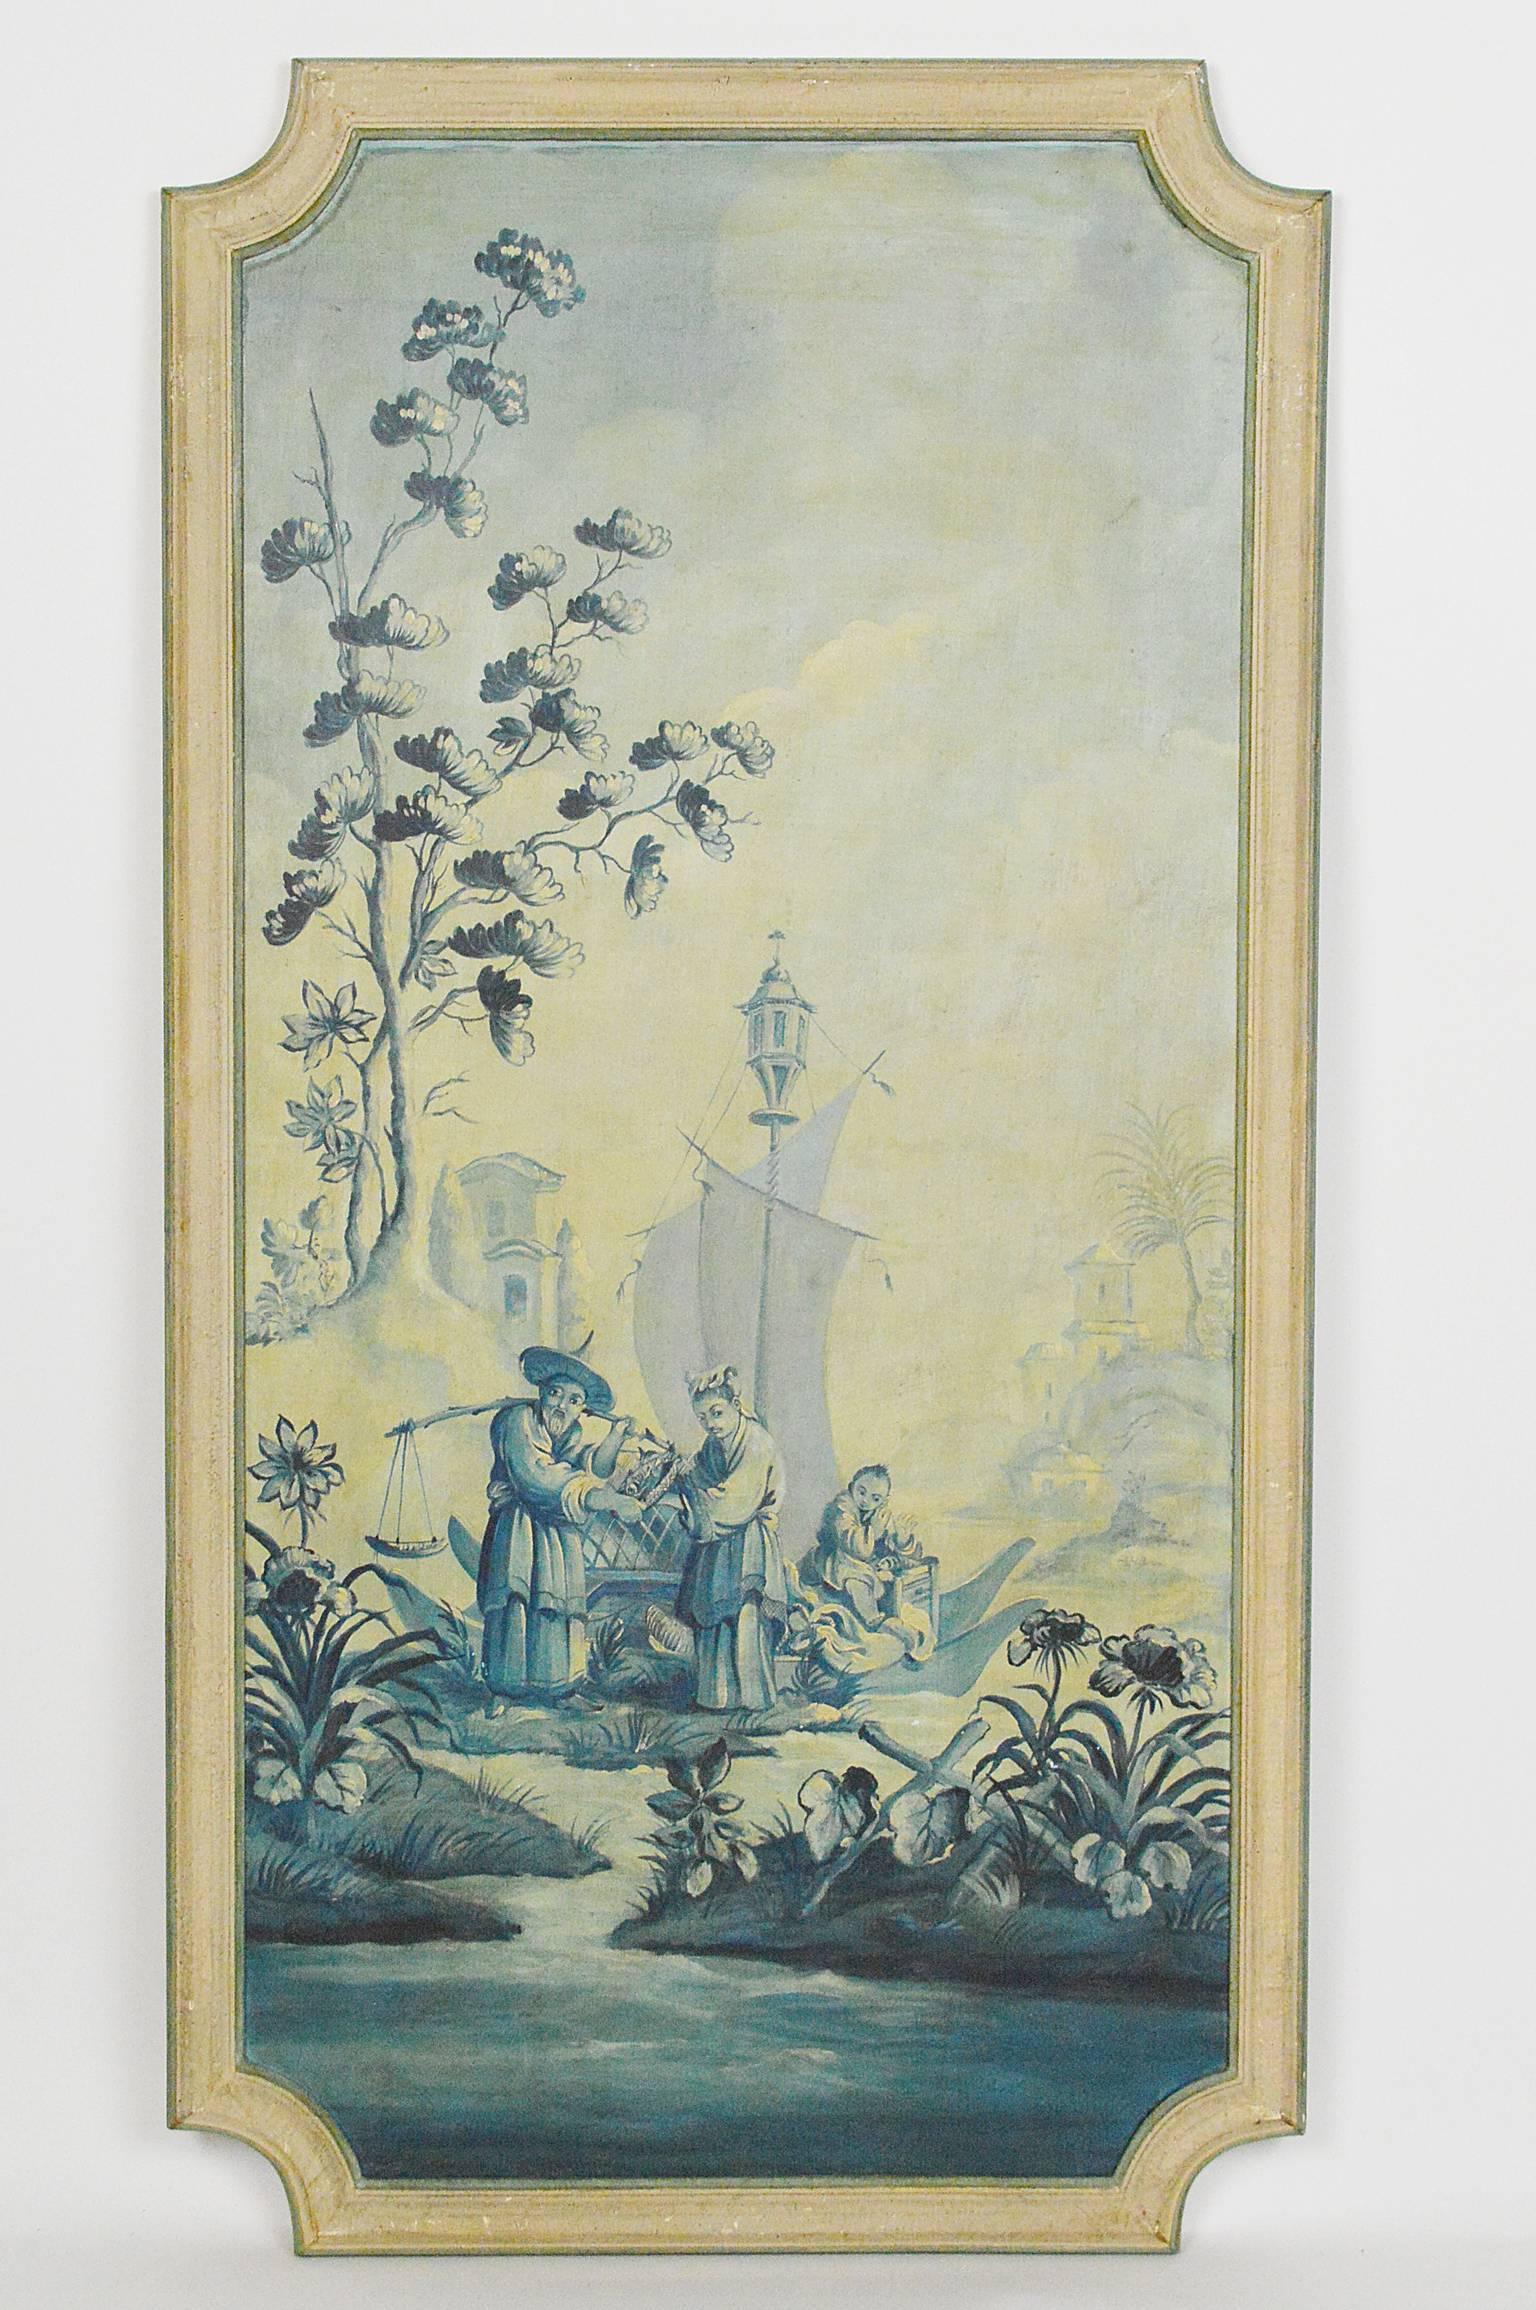 French Louis XVI style chinoiserie decorated oil on canvas paintings.
Provenance: Iris Apfel, New York.